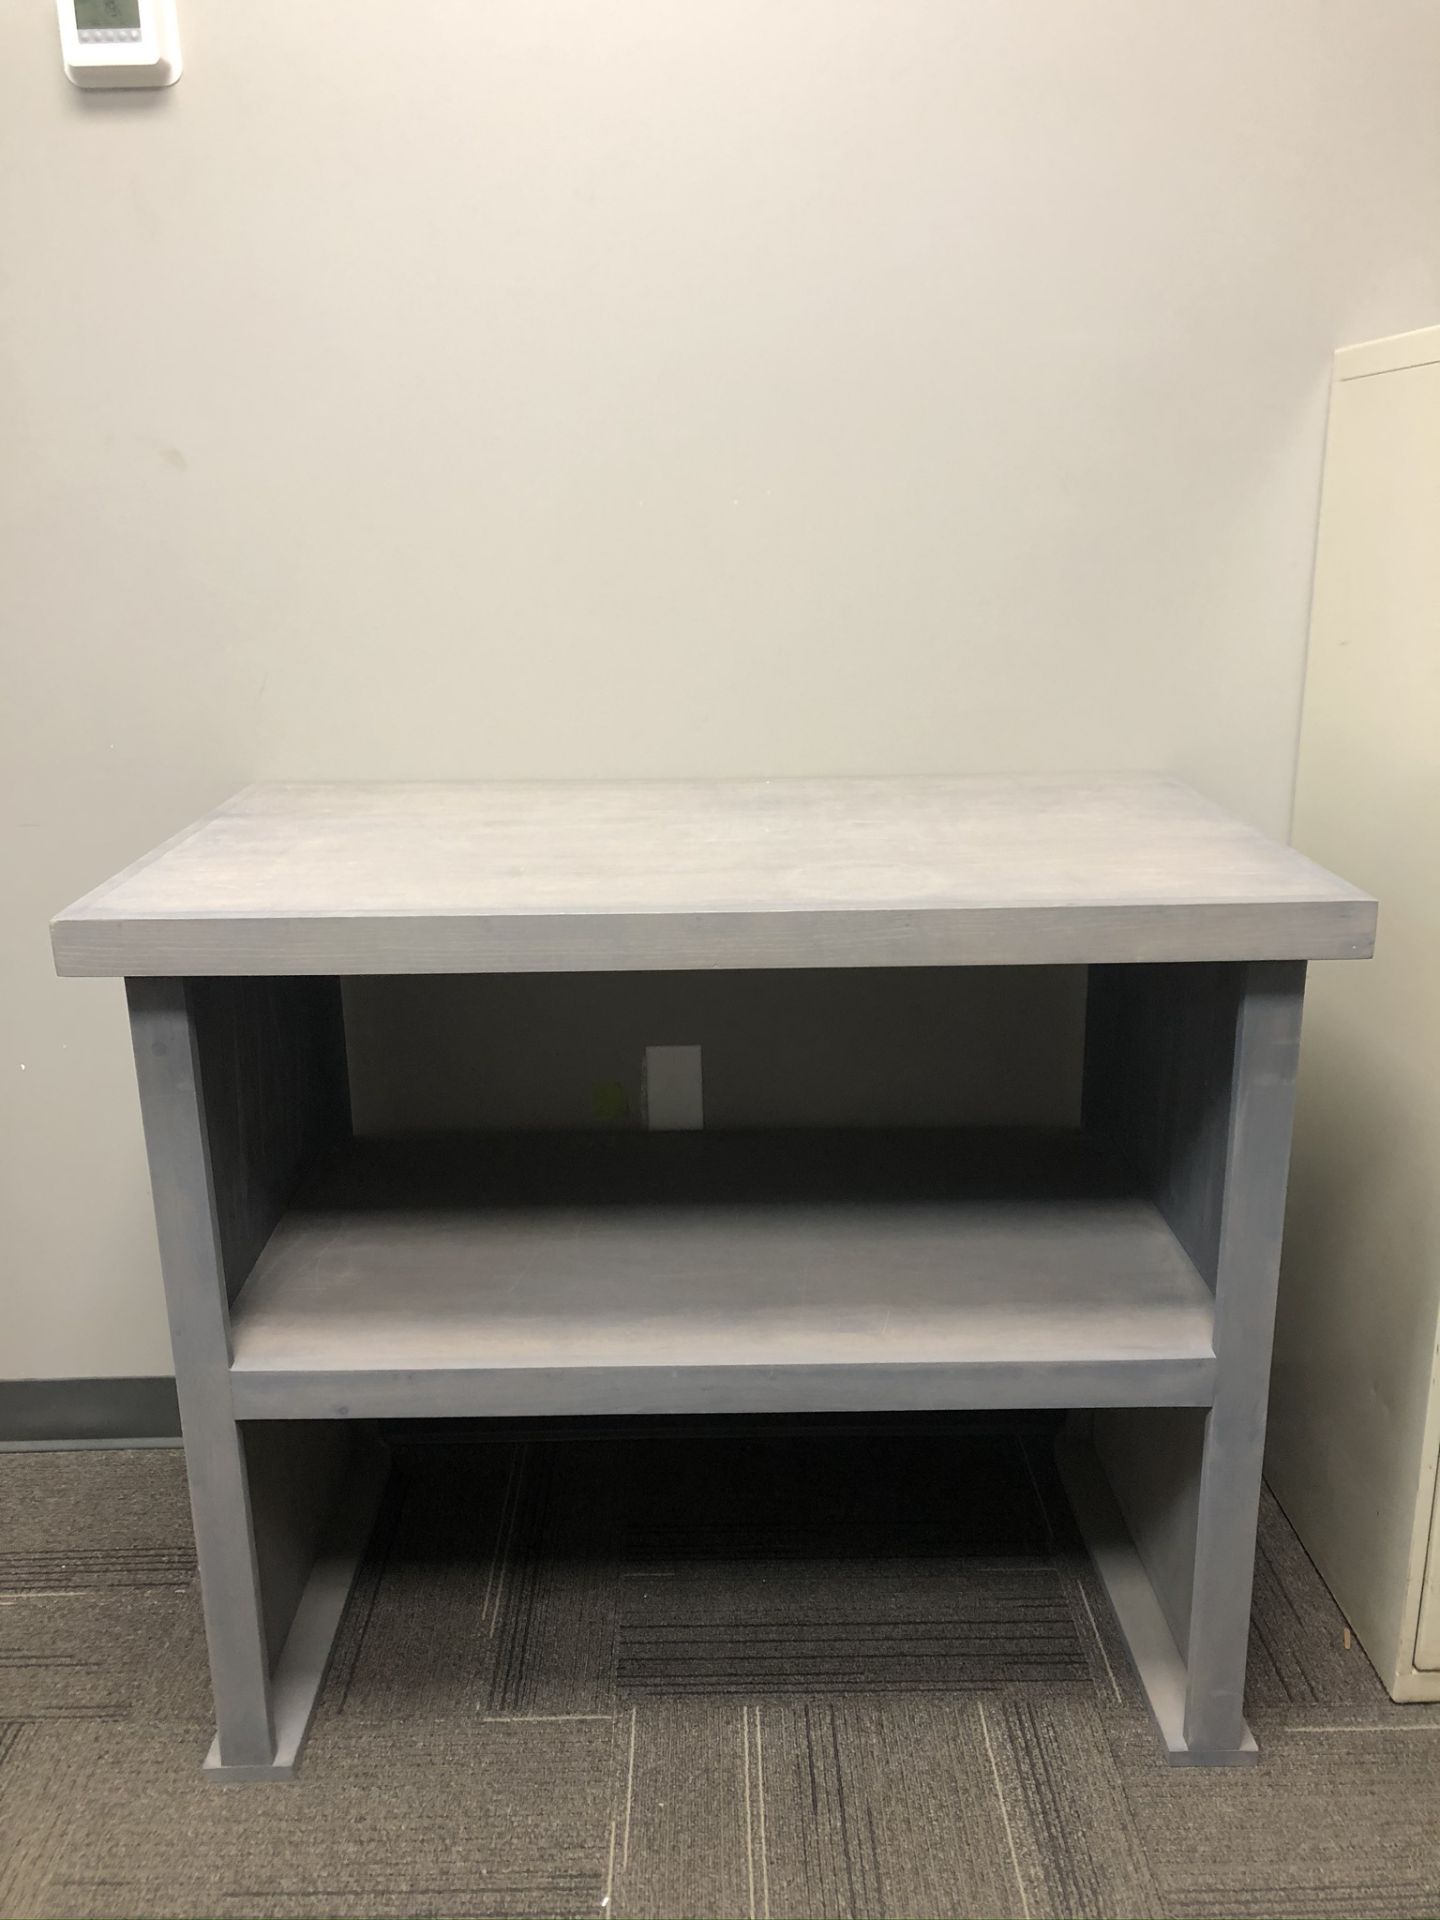 GRAY, L-SHAPED, OFFICE DESK WITH TABLE, HUTCH AND WALL MOUNTED FILING HOLDERS - Image 2 of 2